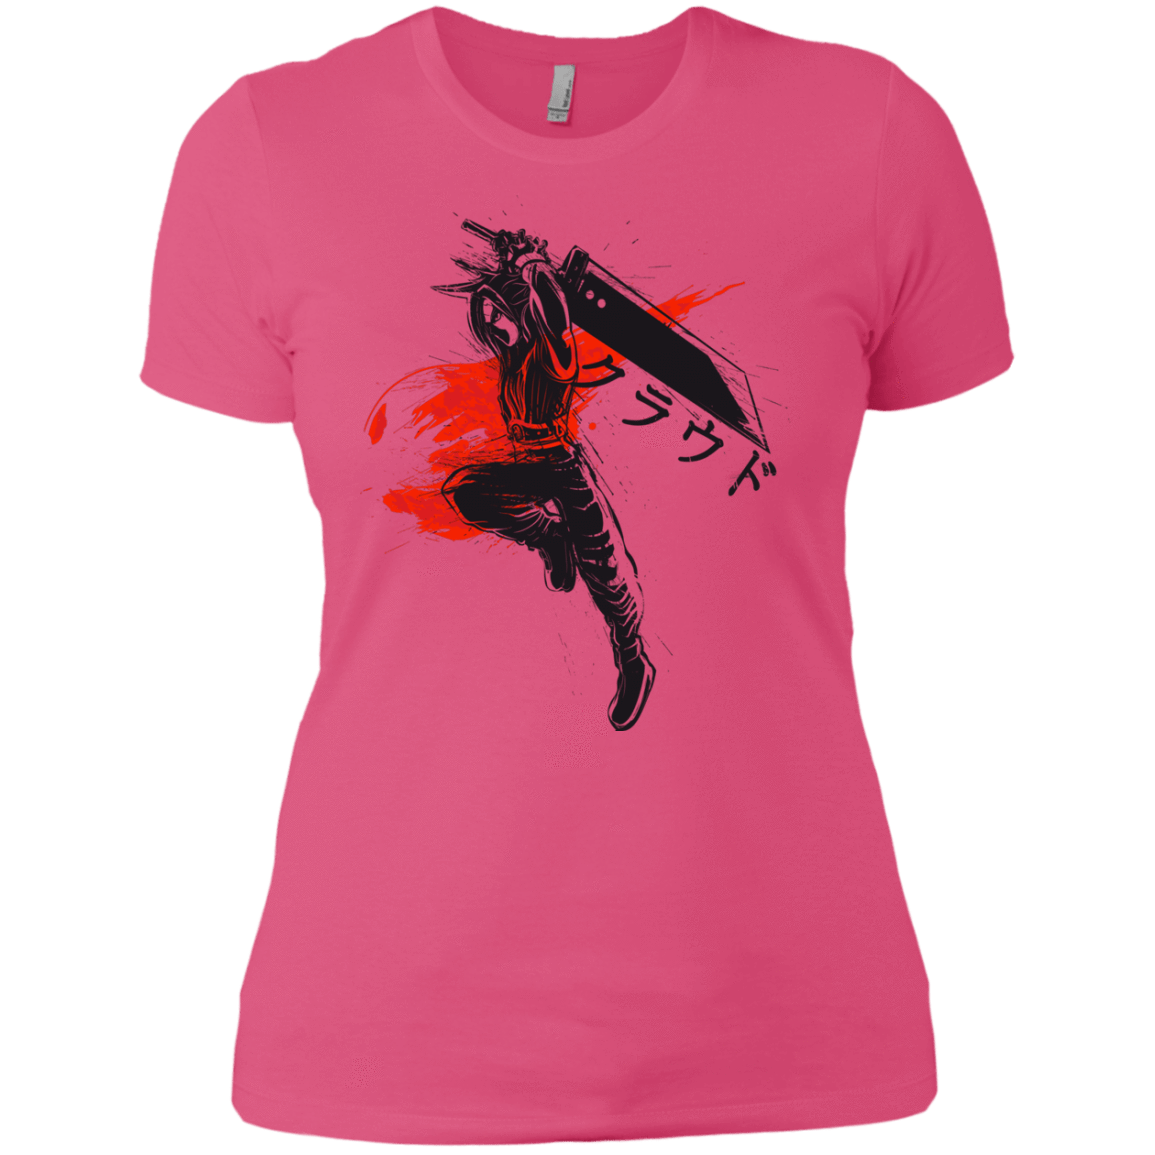 T-Shirts Hot Pink / X-Small Traditional Soldier Women's Premium T-Shirt